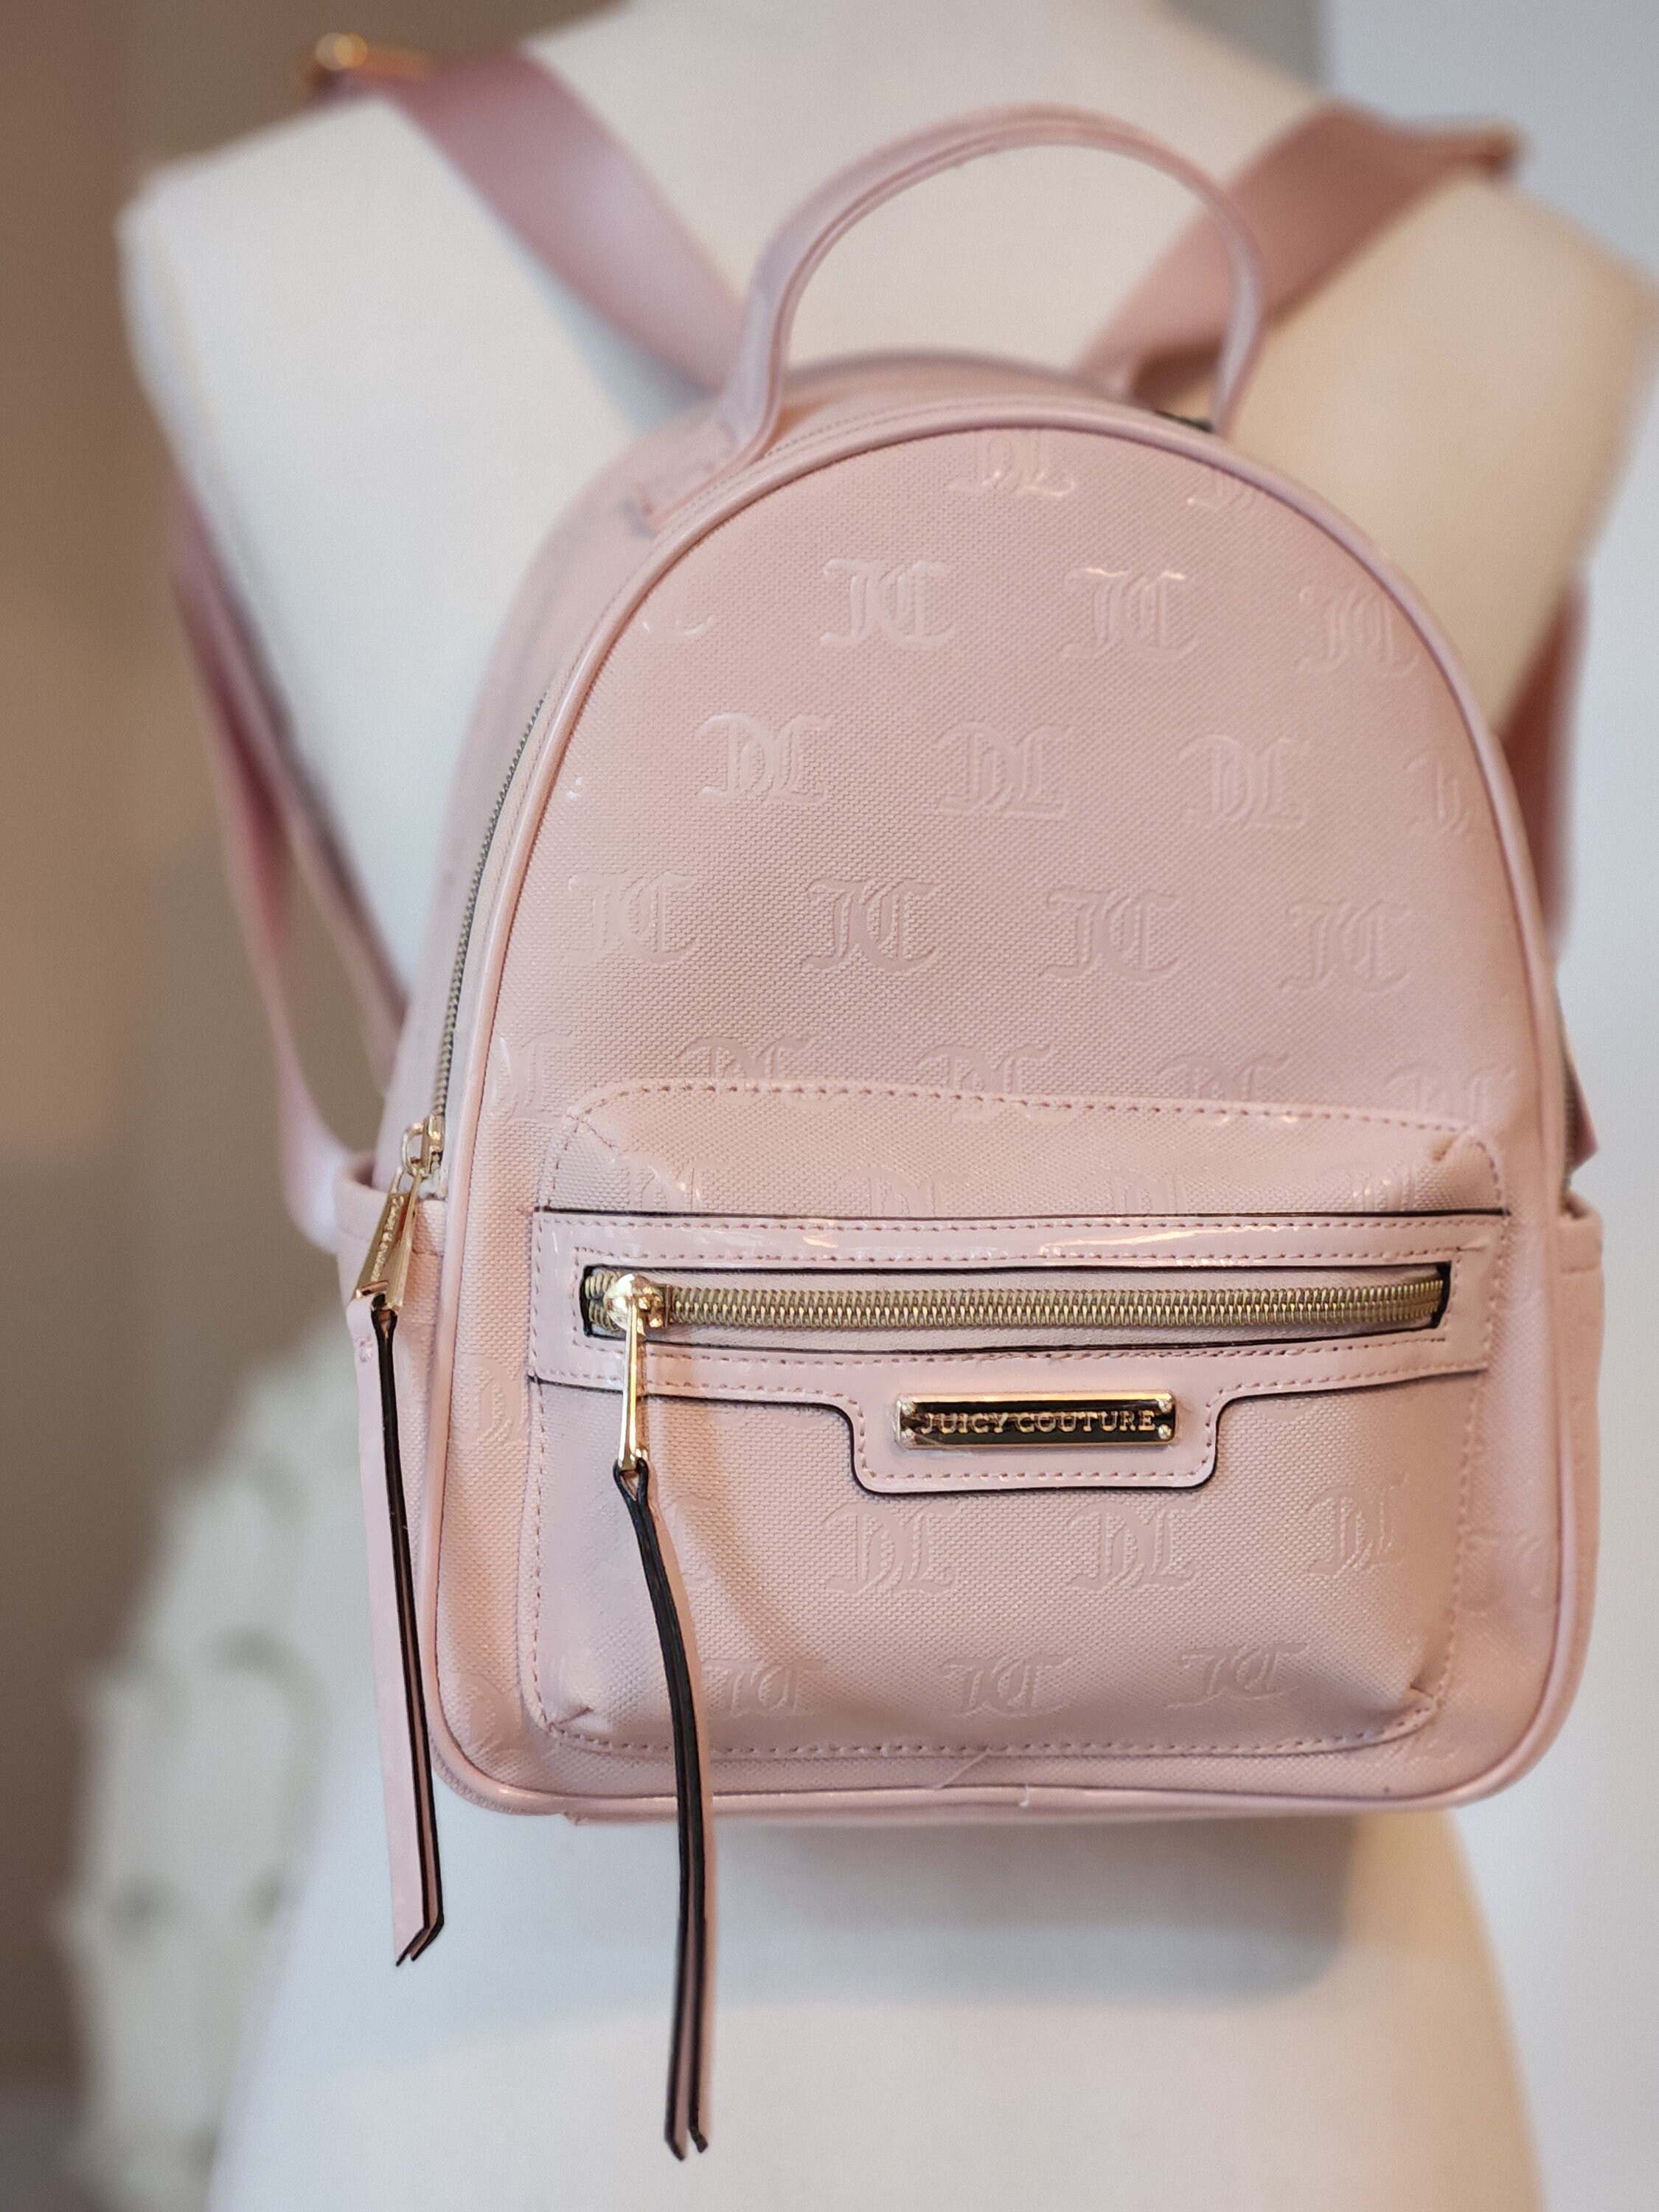 Juicy Couture Pink Mini Backpack